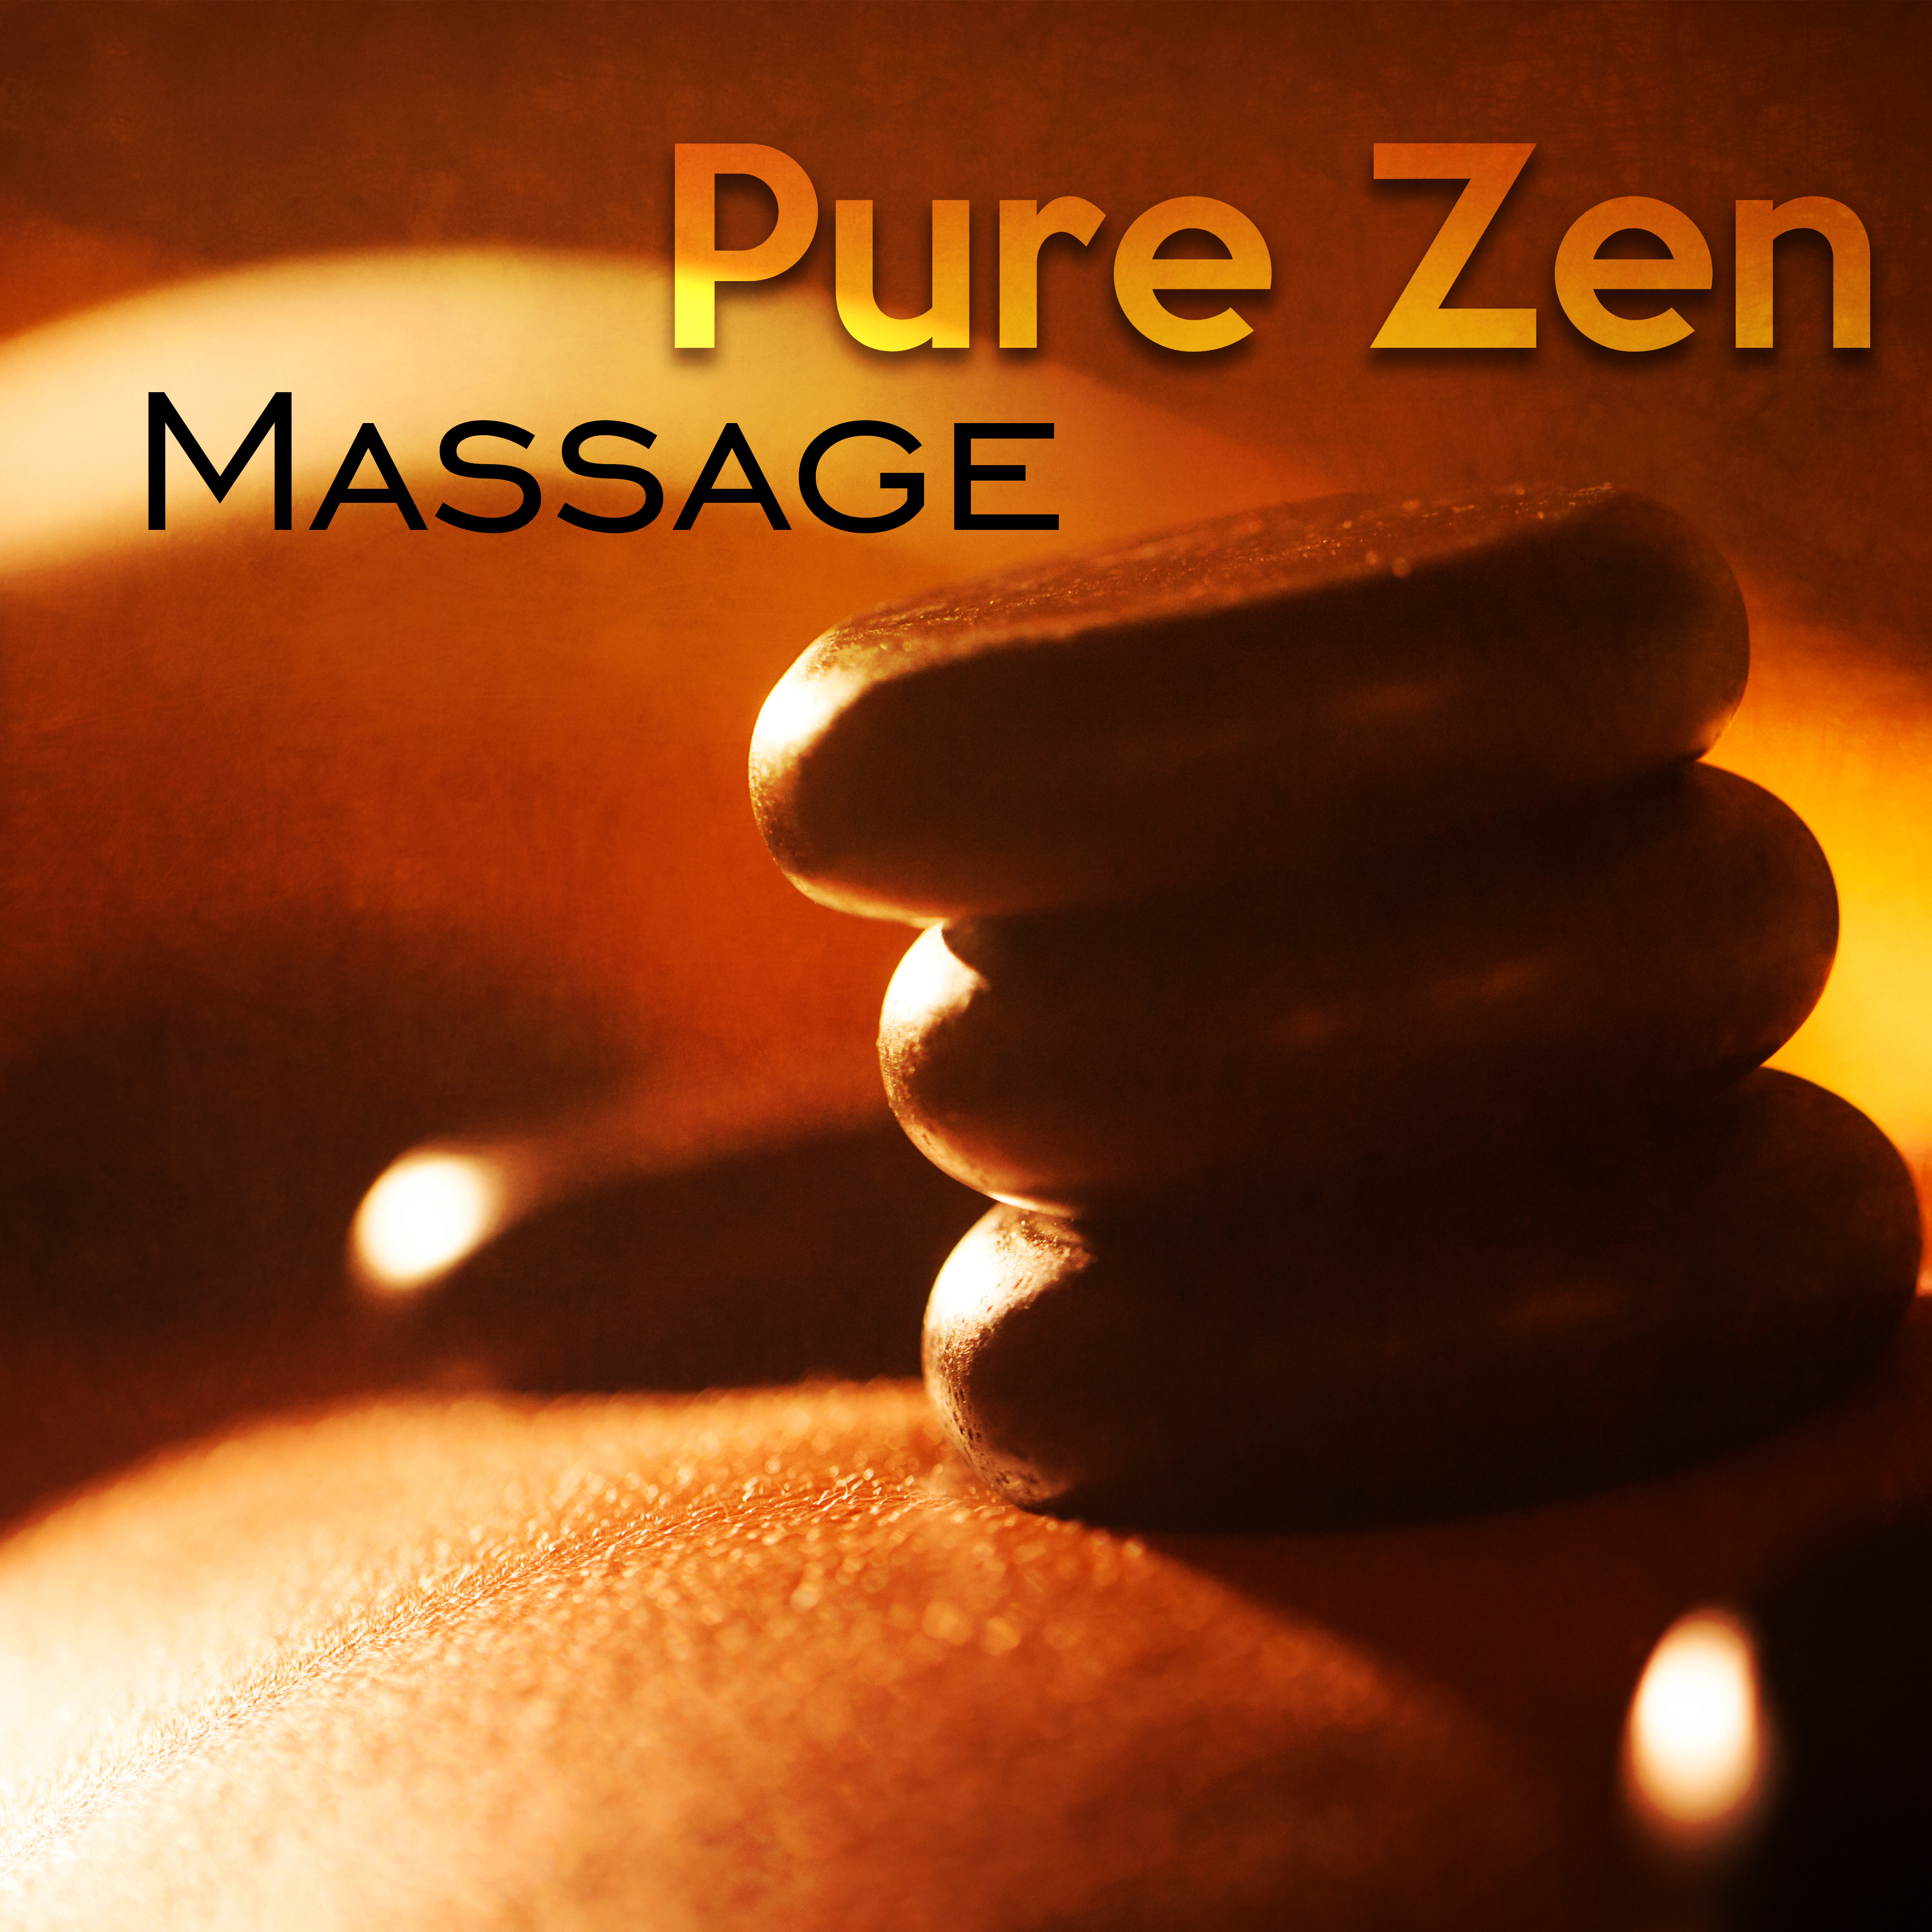 Pure Zen Massage  Relaxing Music for Massage Therapy, Wellness, Yoga, Zen, New Age